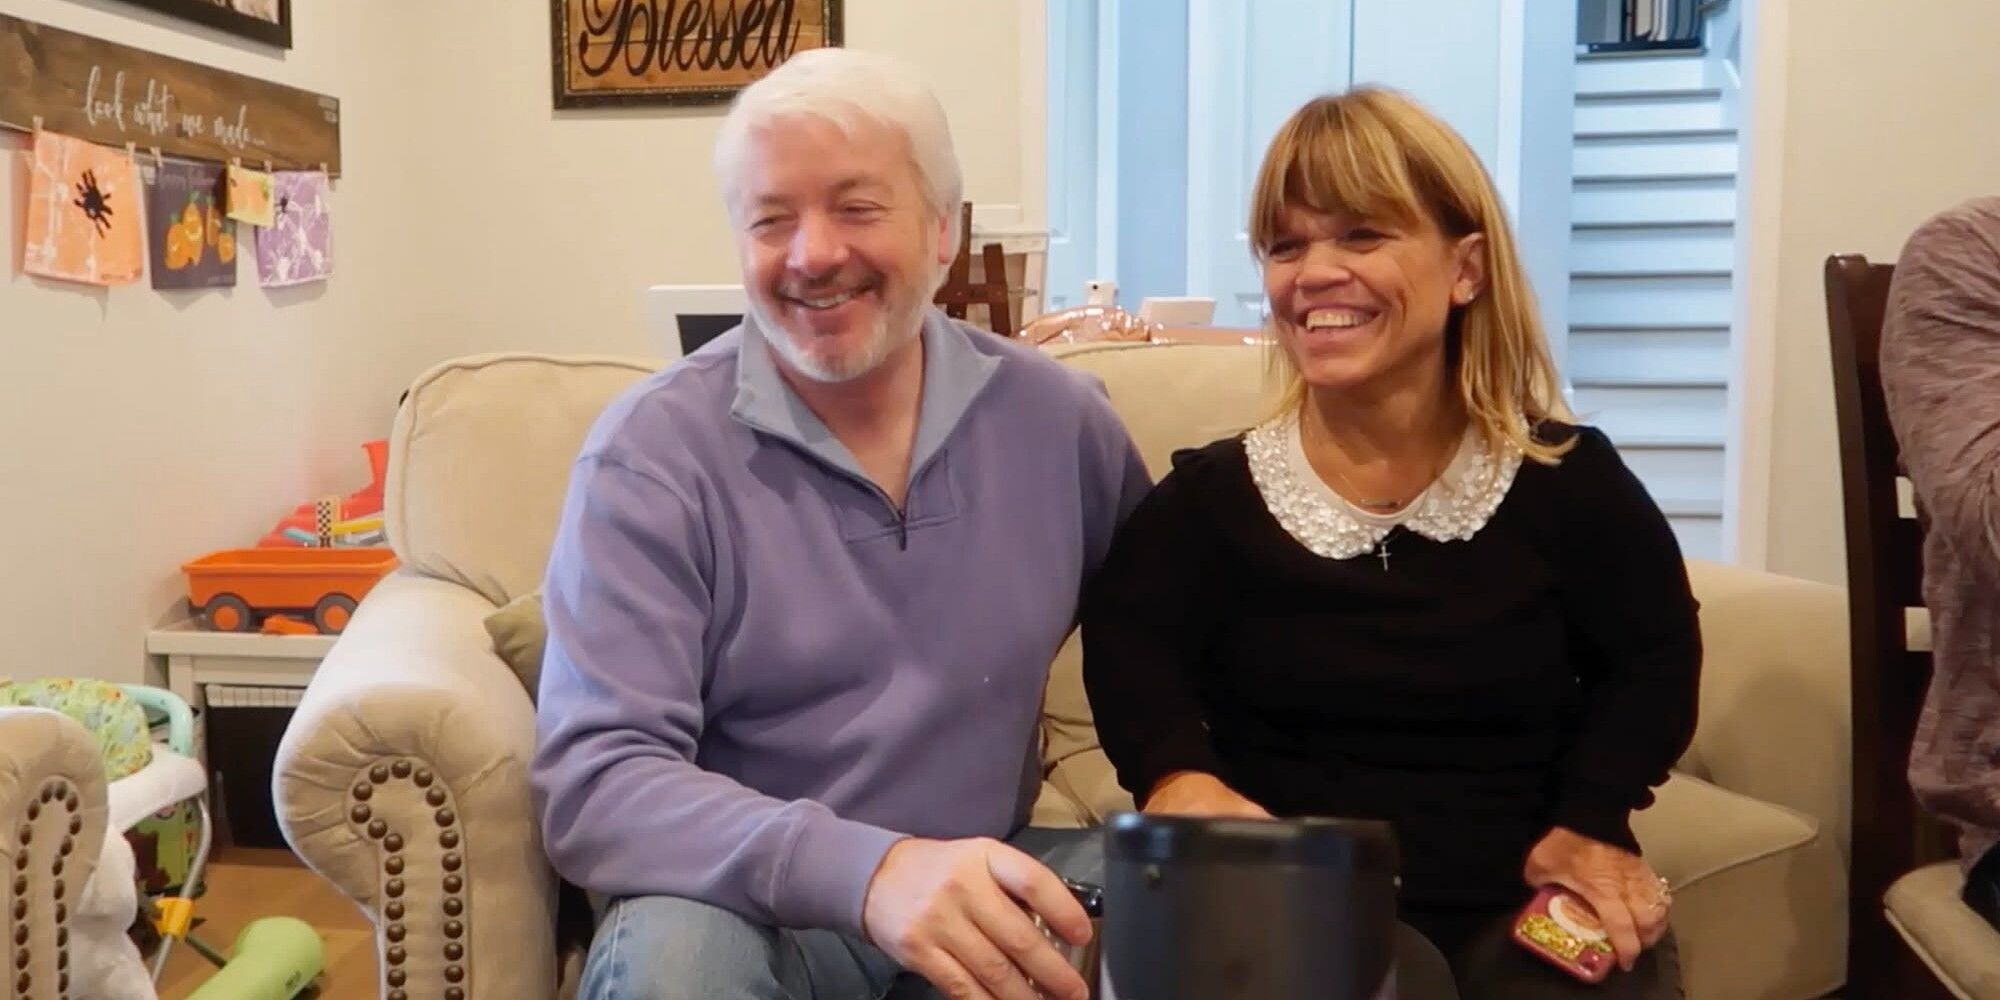 Amy Roloff and Chris Marek from Little People, Big World chatting on couch